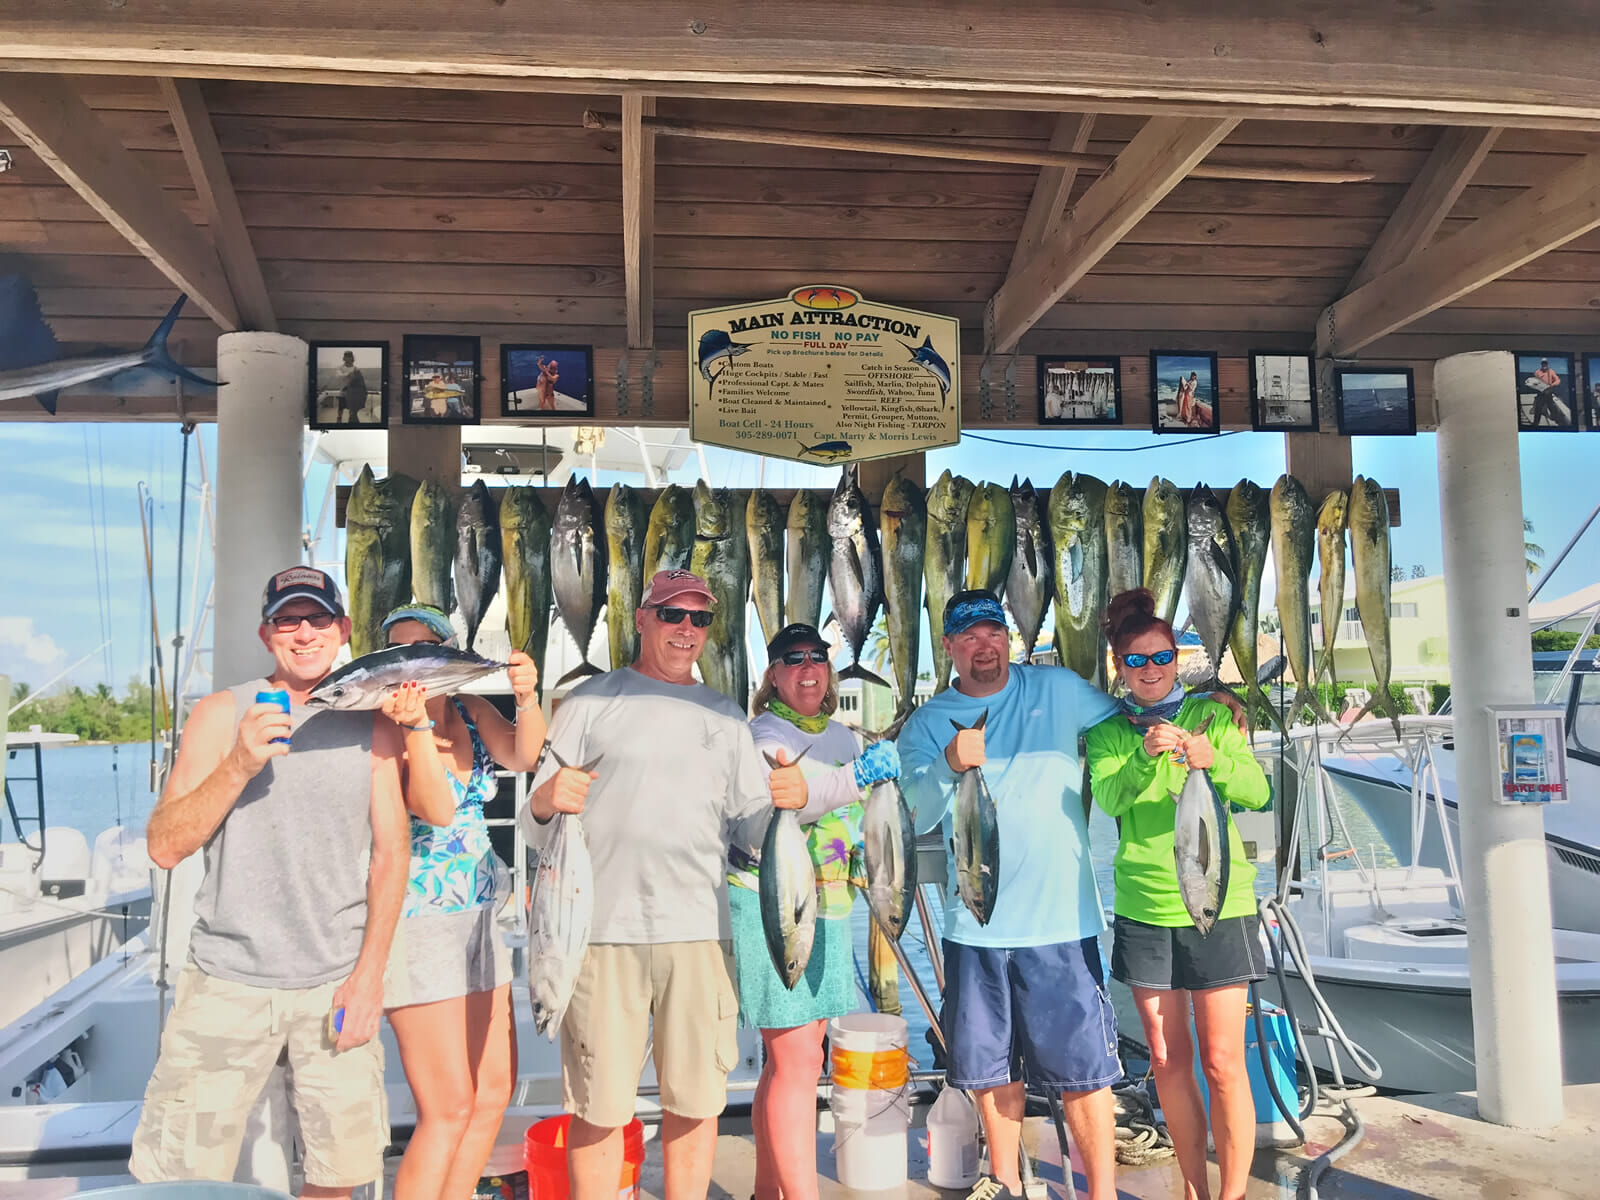 61 Saifish in one day Florida Keys Records